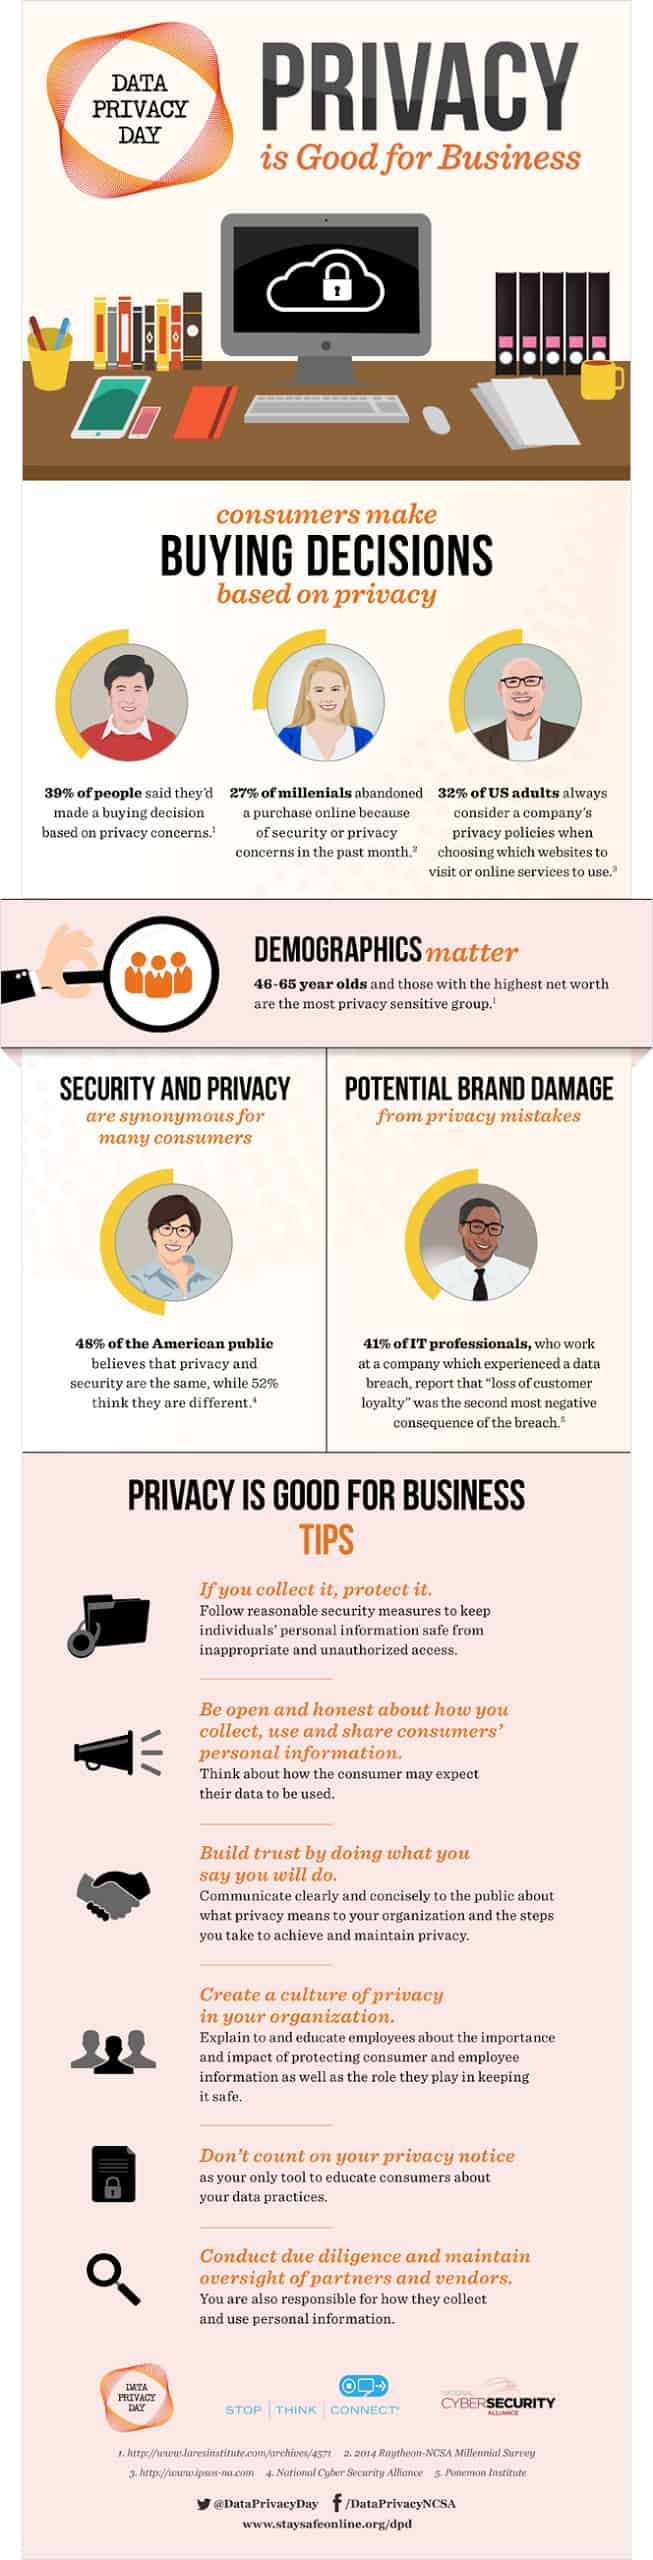 dpd-privacy_good_business